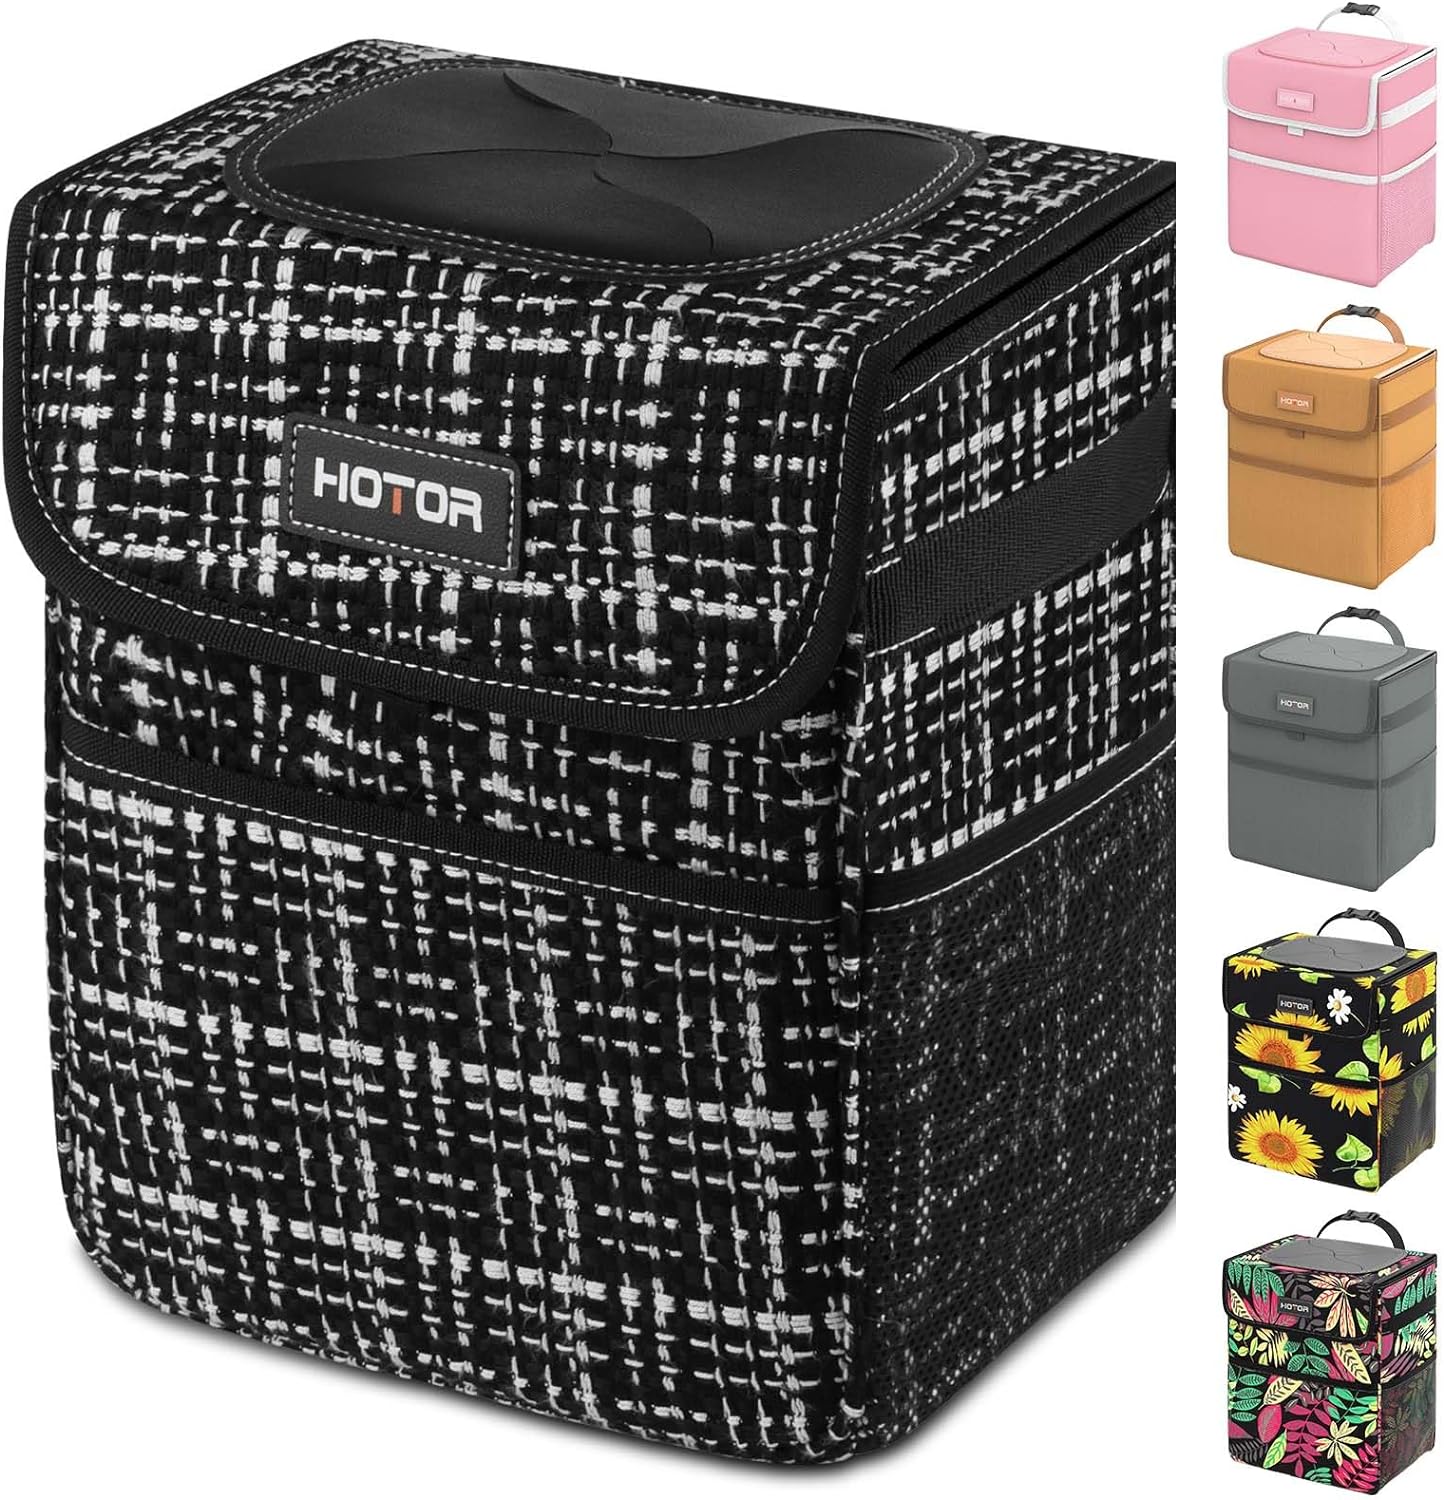 HOTOR Car Trash Can with Lid, Brown Car Trash Bag Hanging with Storage Pockets, 100% Leak-Proof Car Garbage Can with Adjustable Straps, Magnetic Snaps, Waterproof Car Garbage Bin for Interior Car